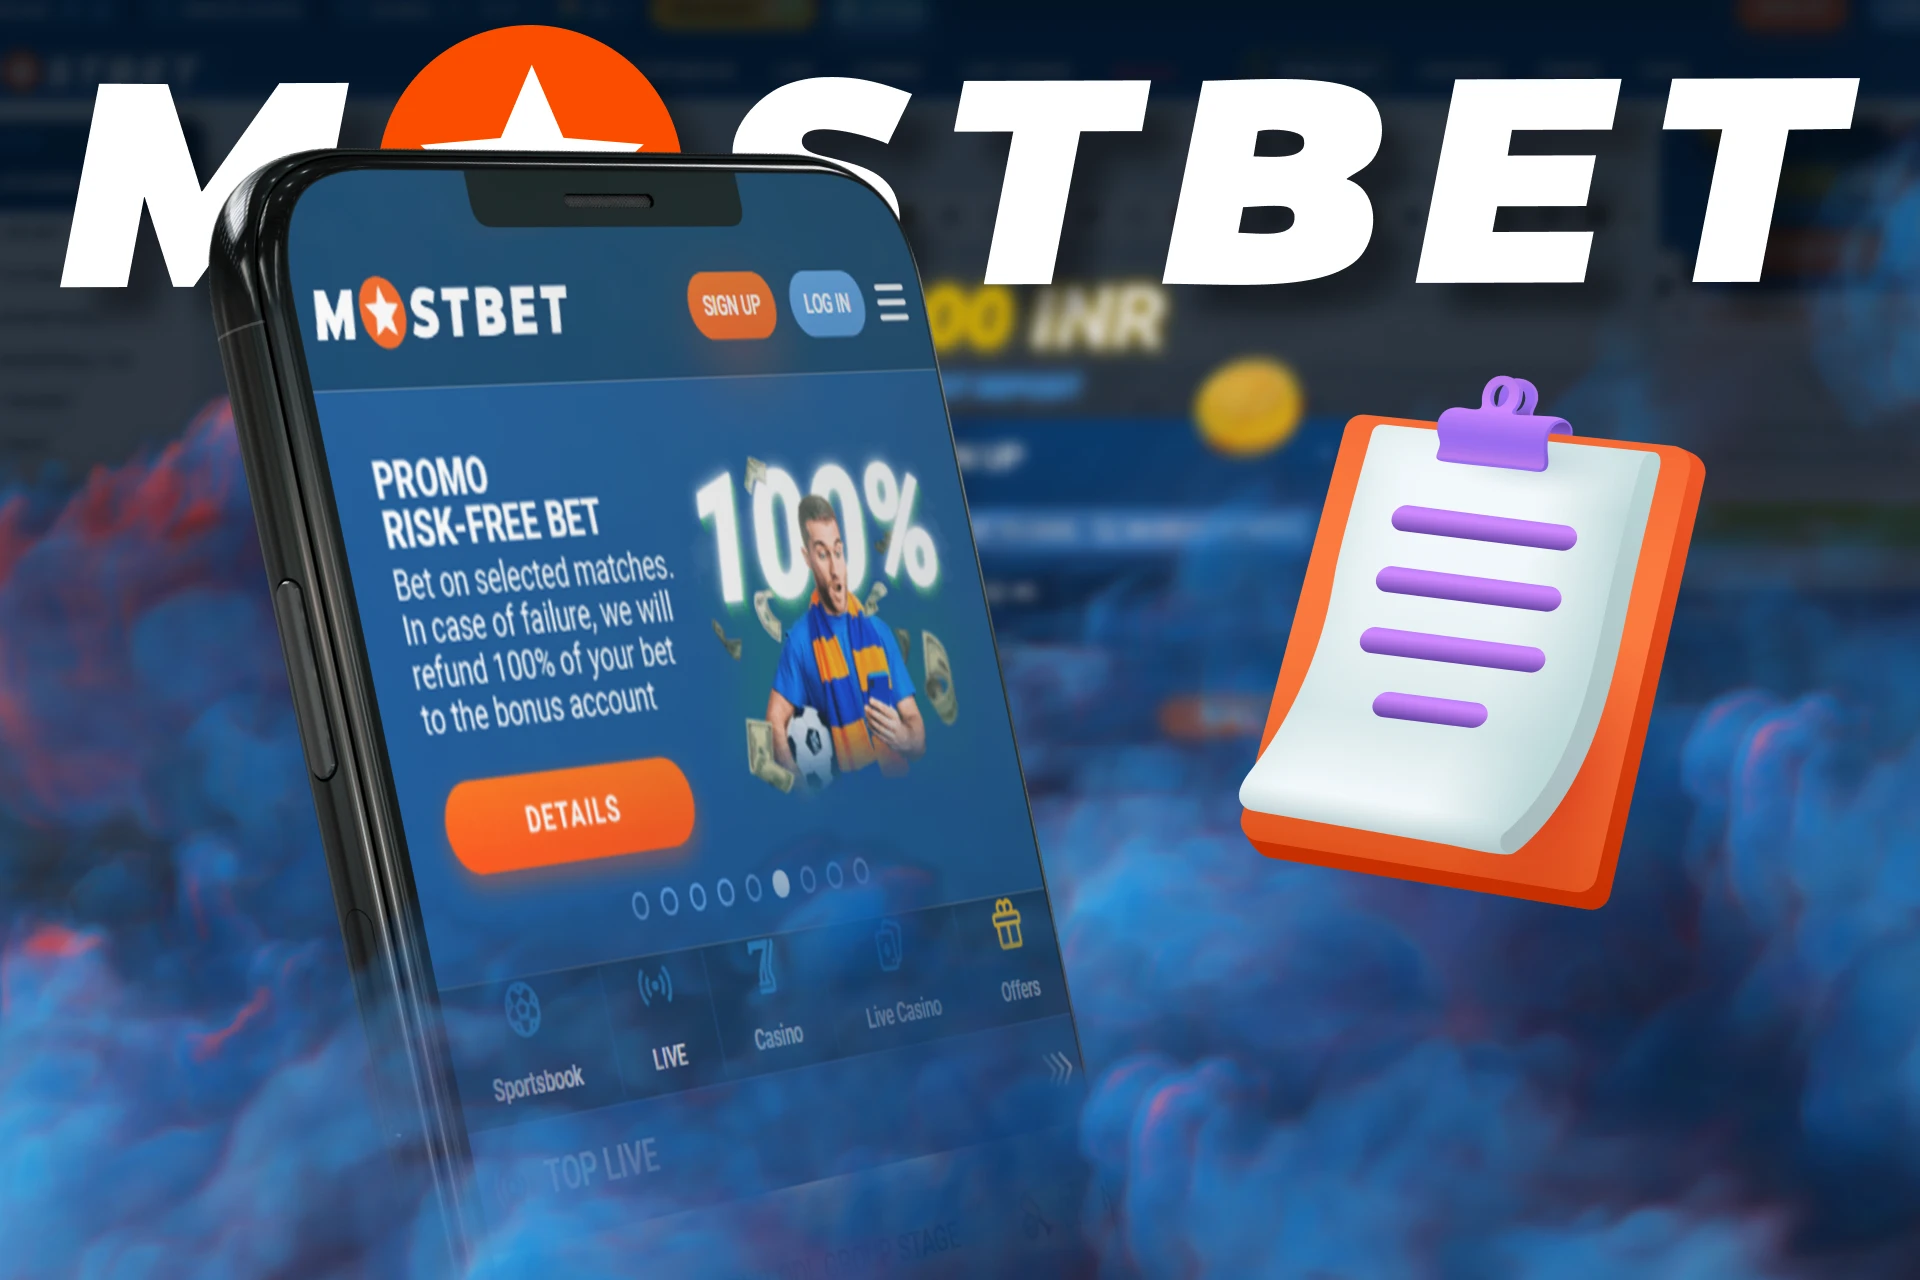 Read these rules to start betting on Mostbet through the app.